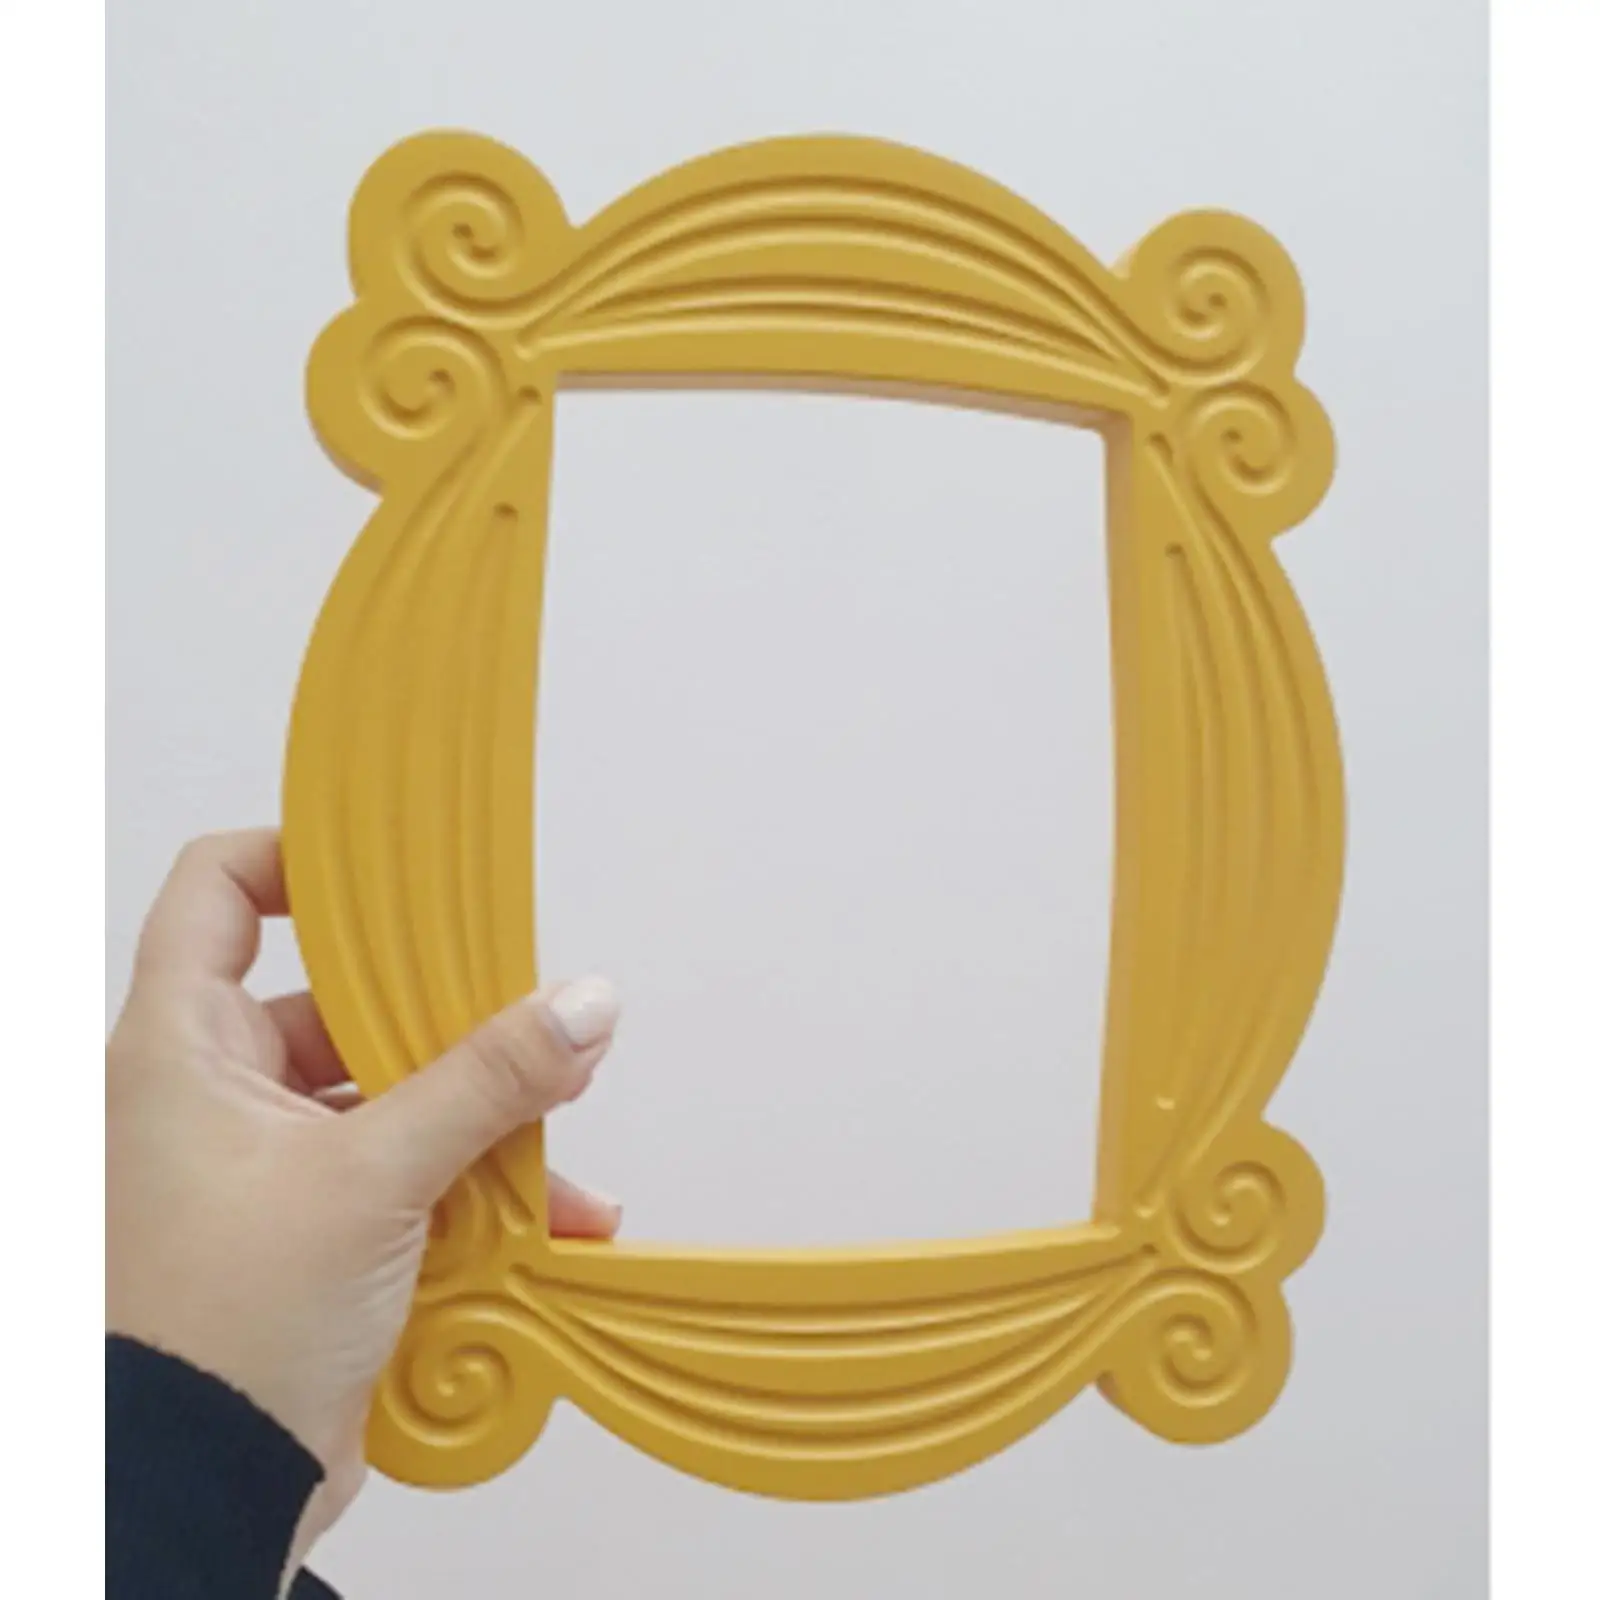 Handicraft Peephole Frame Hanging Picture Display Peephole Door Frame Picture Frame Photo Frame for Christmas Home Decoration